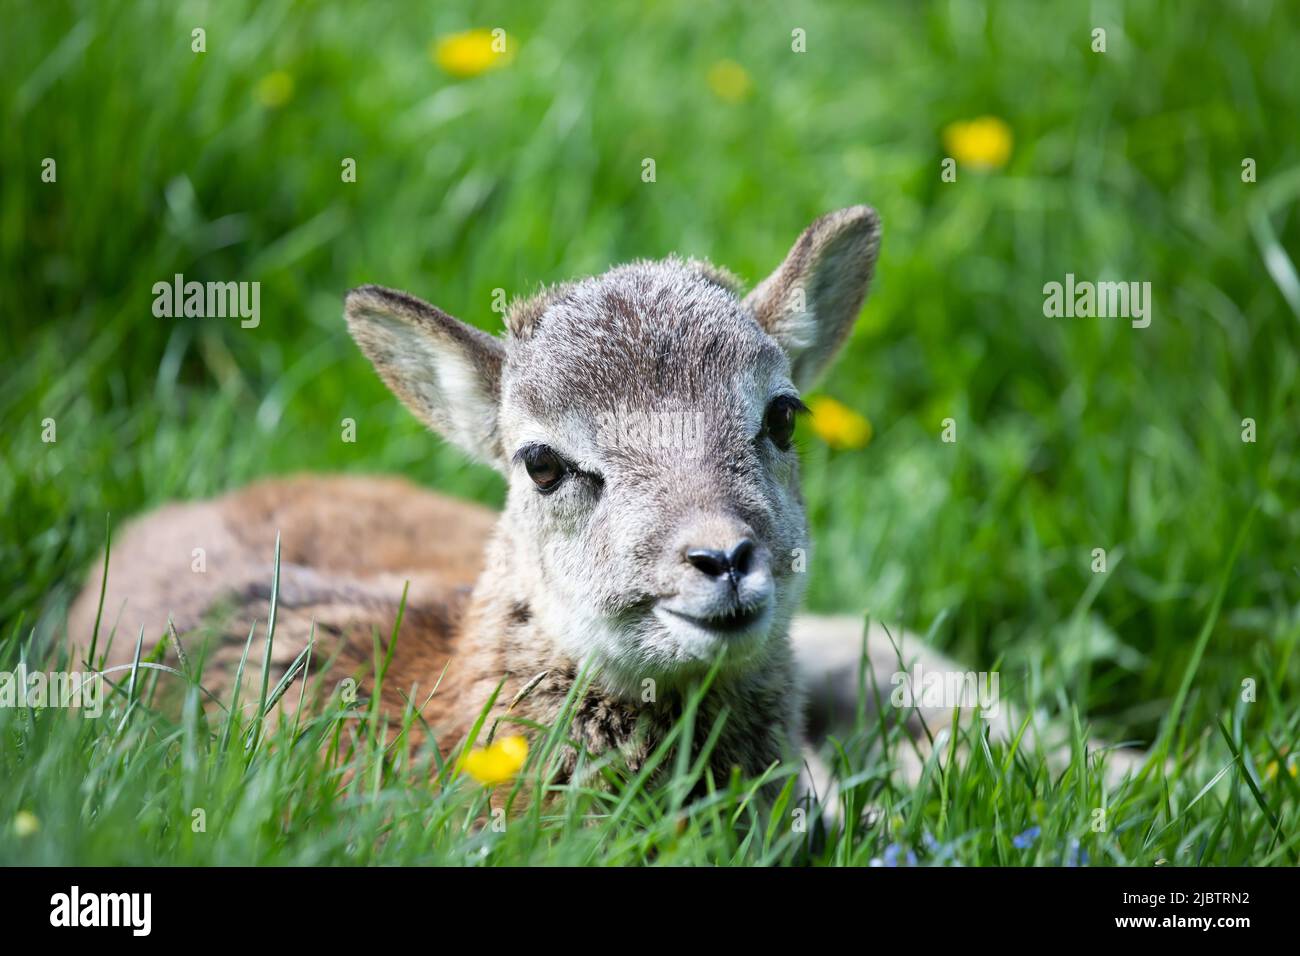 Small cute baby mouflon lying down and relaxing in green grass.Adorable mouflon fawn, wildlife, baby animals Stock Photo